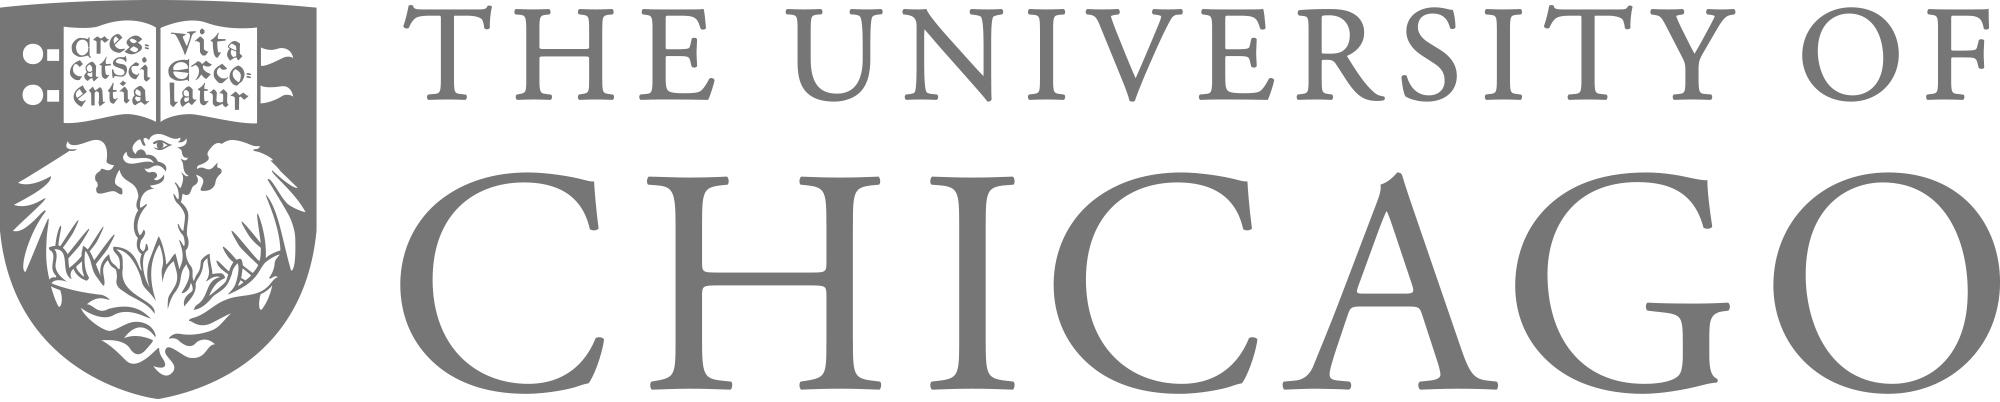 University of Chicago Seal